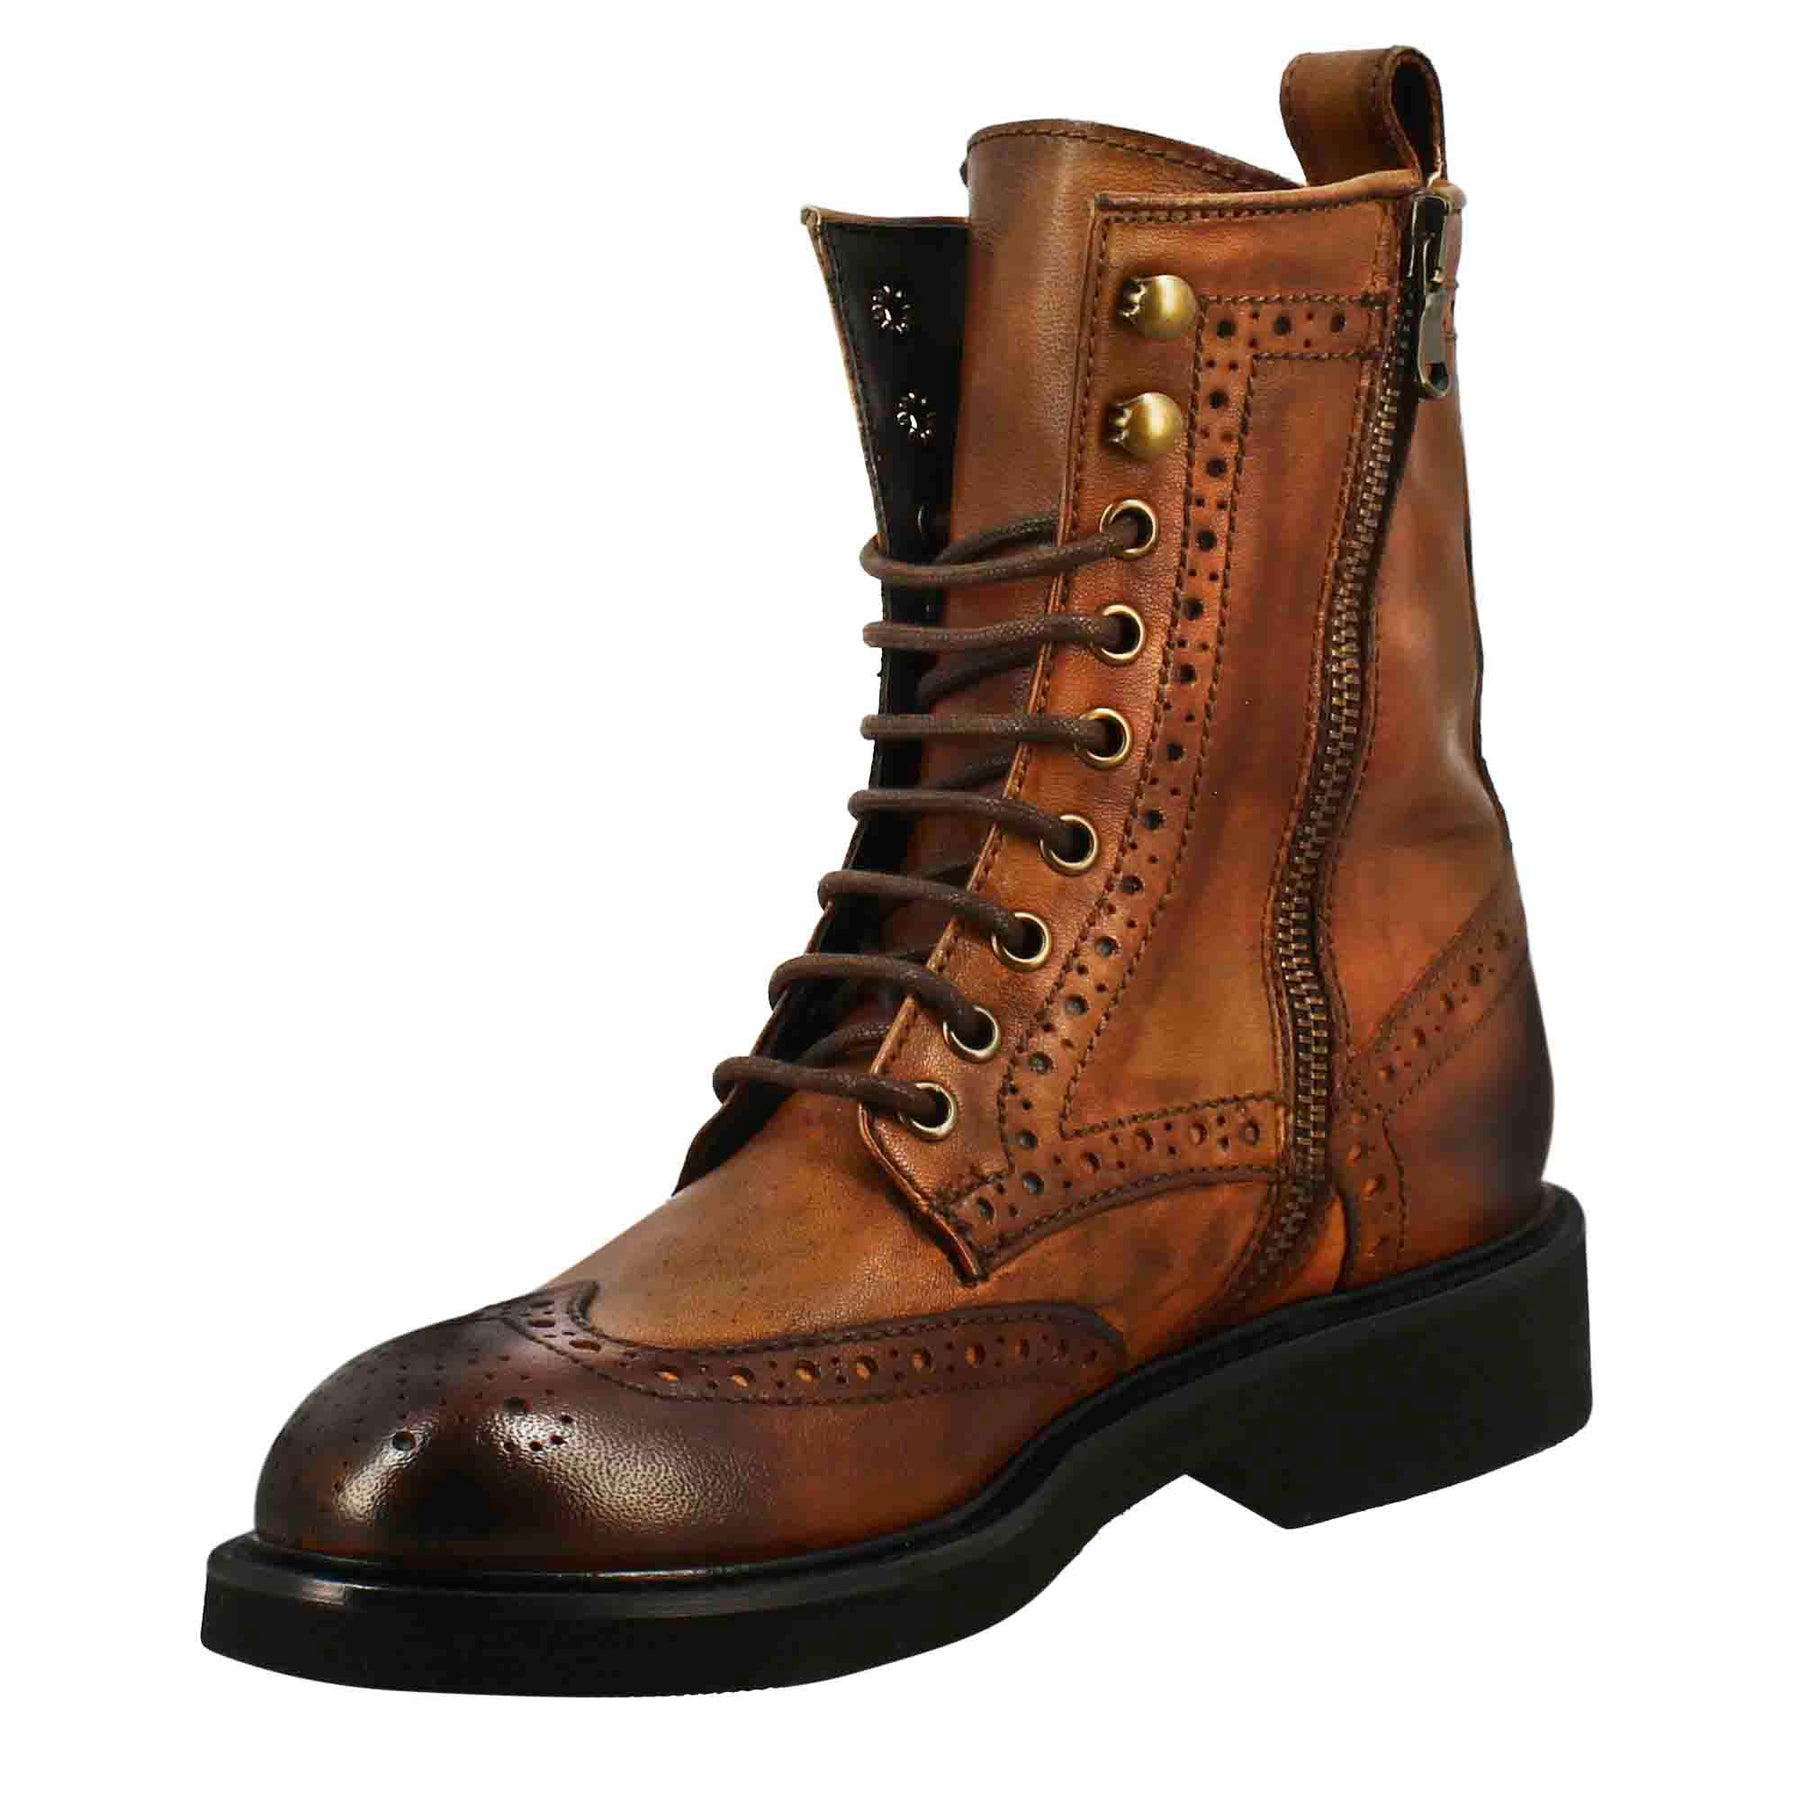 Women's amphibious ankle boot with brogue details in washed leather in dark tan colour